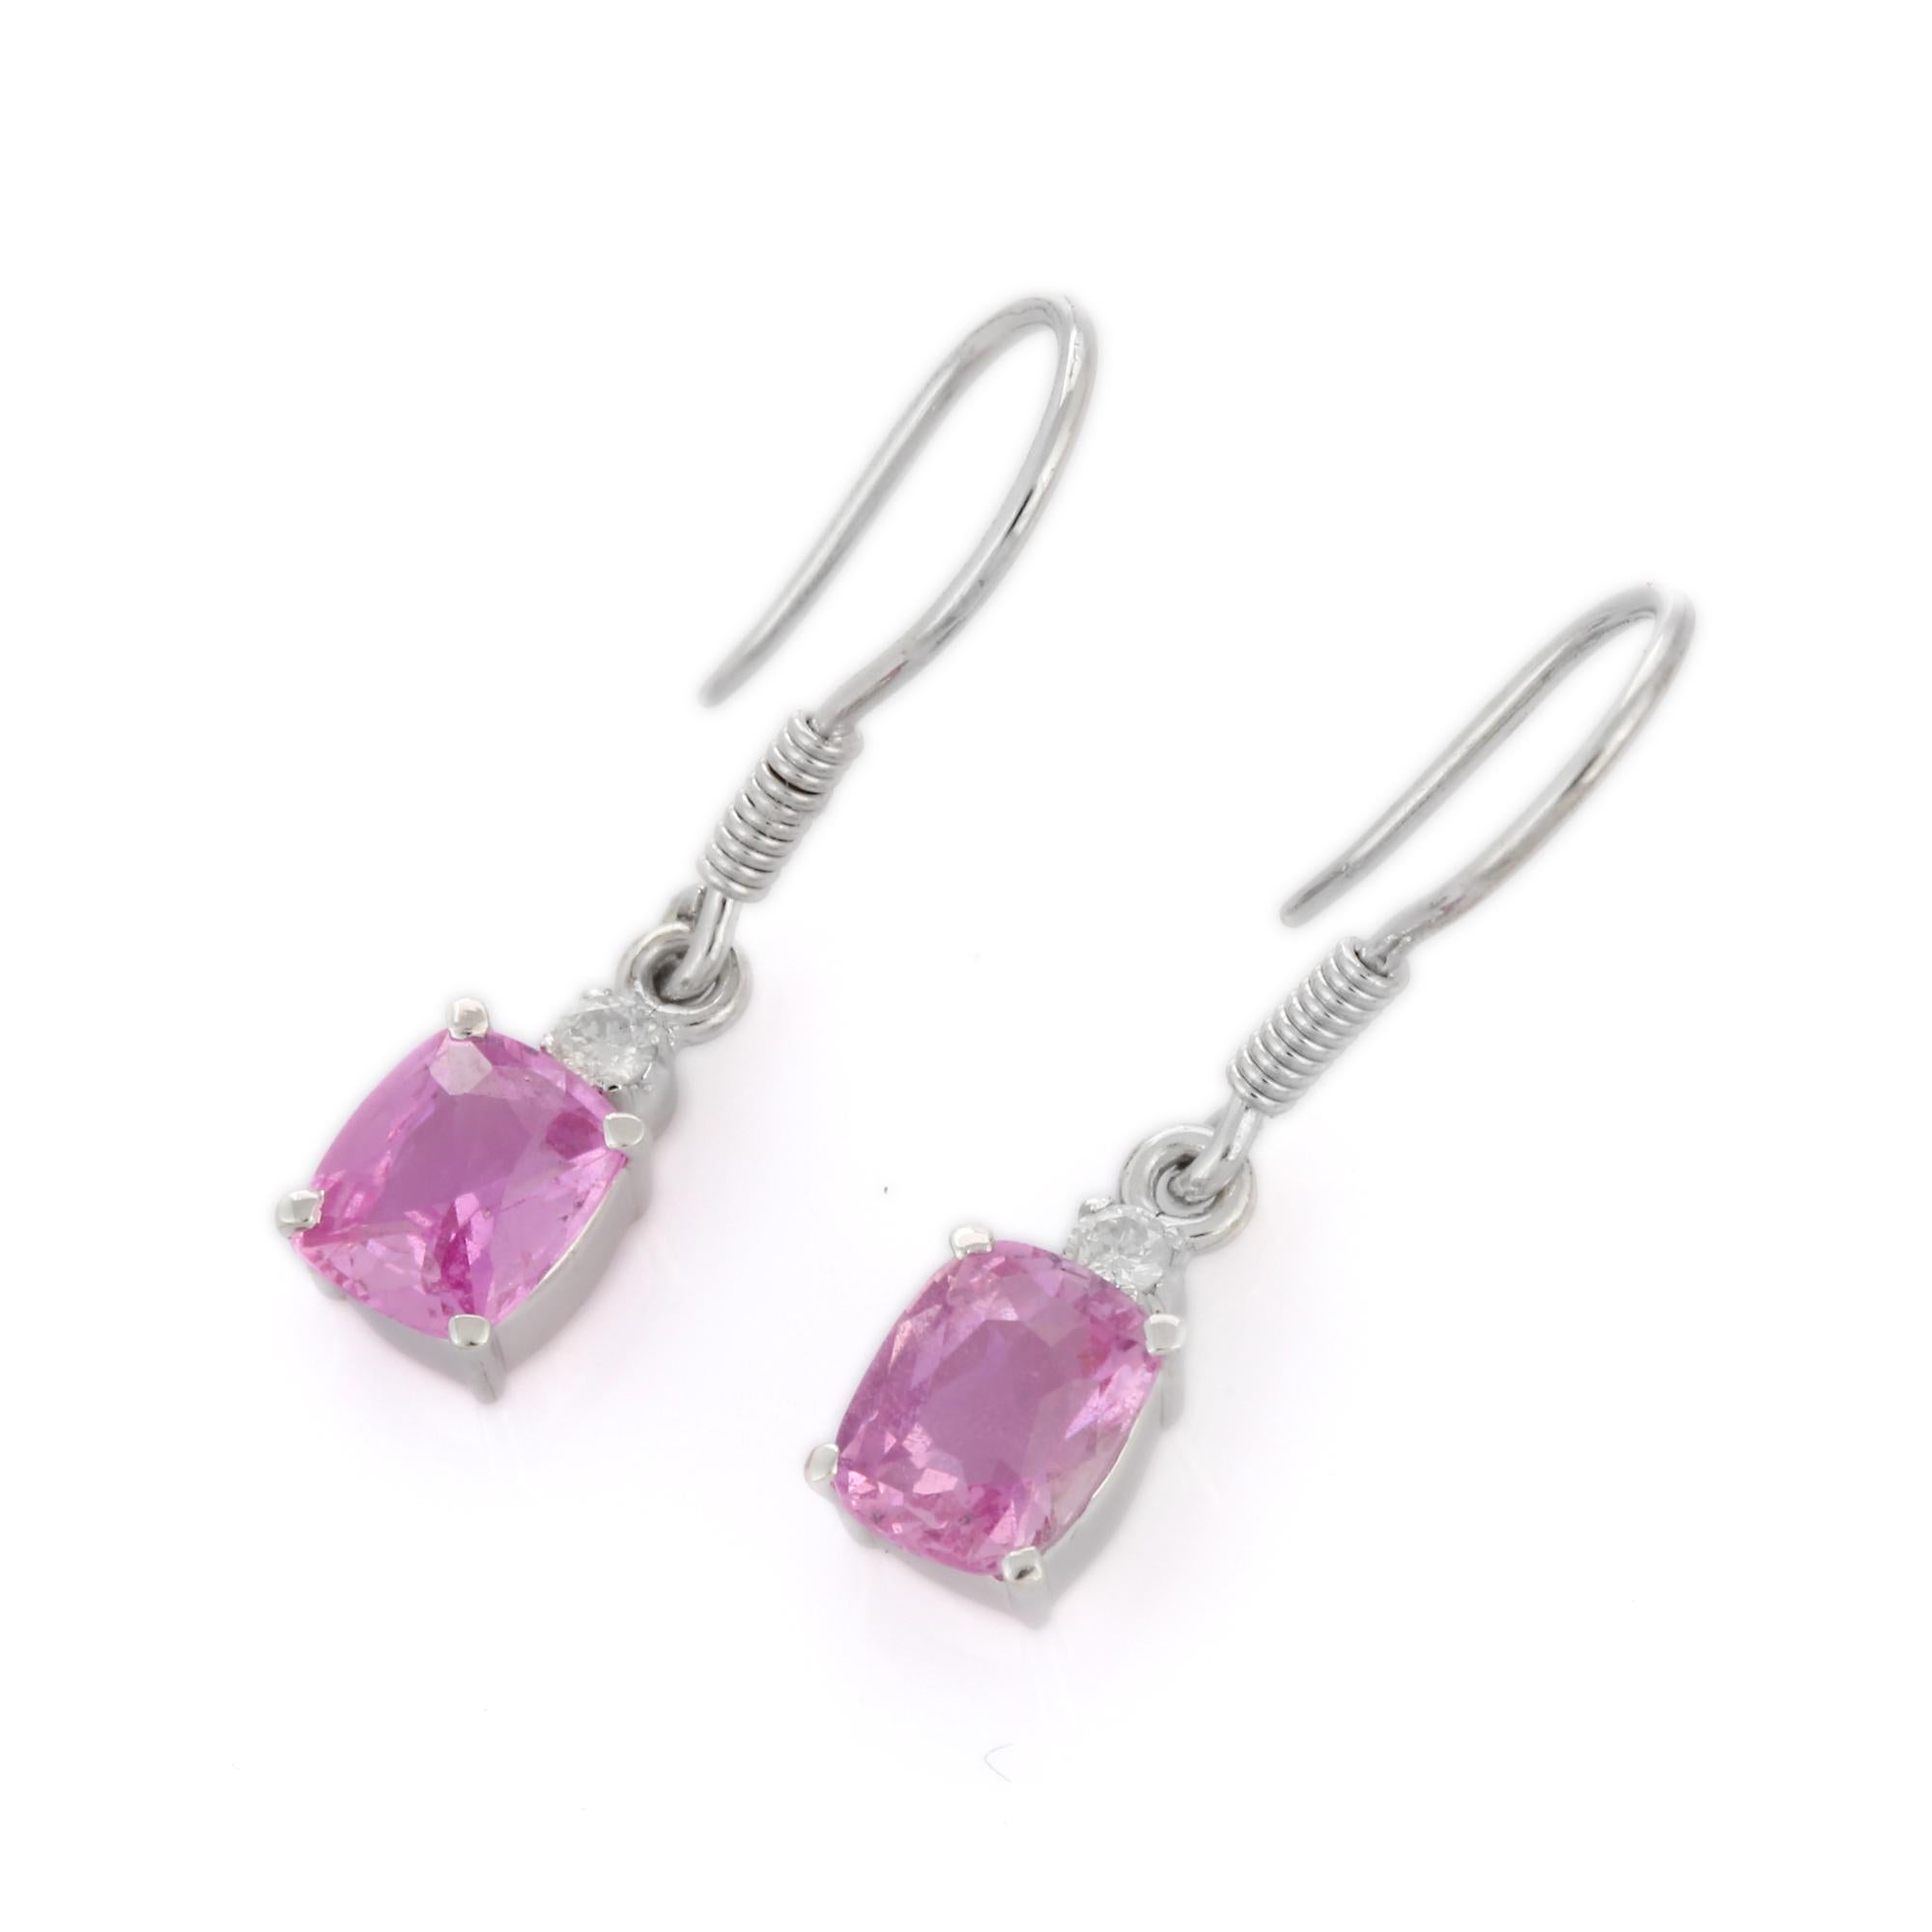 Pink Sapphire Dangle earrings to make a statement with your look. These earrings create a sparkling, luxurious look featuring cushion cut gemstone.
If you love to gravitate towards unique styles, this piece of jewelry is perfect for you.

PRODUCT